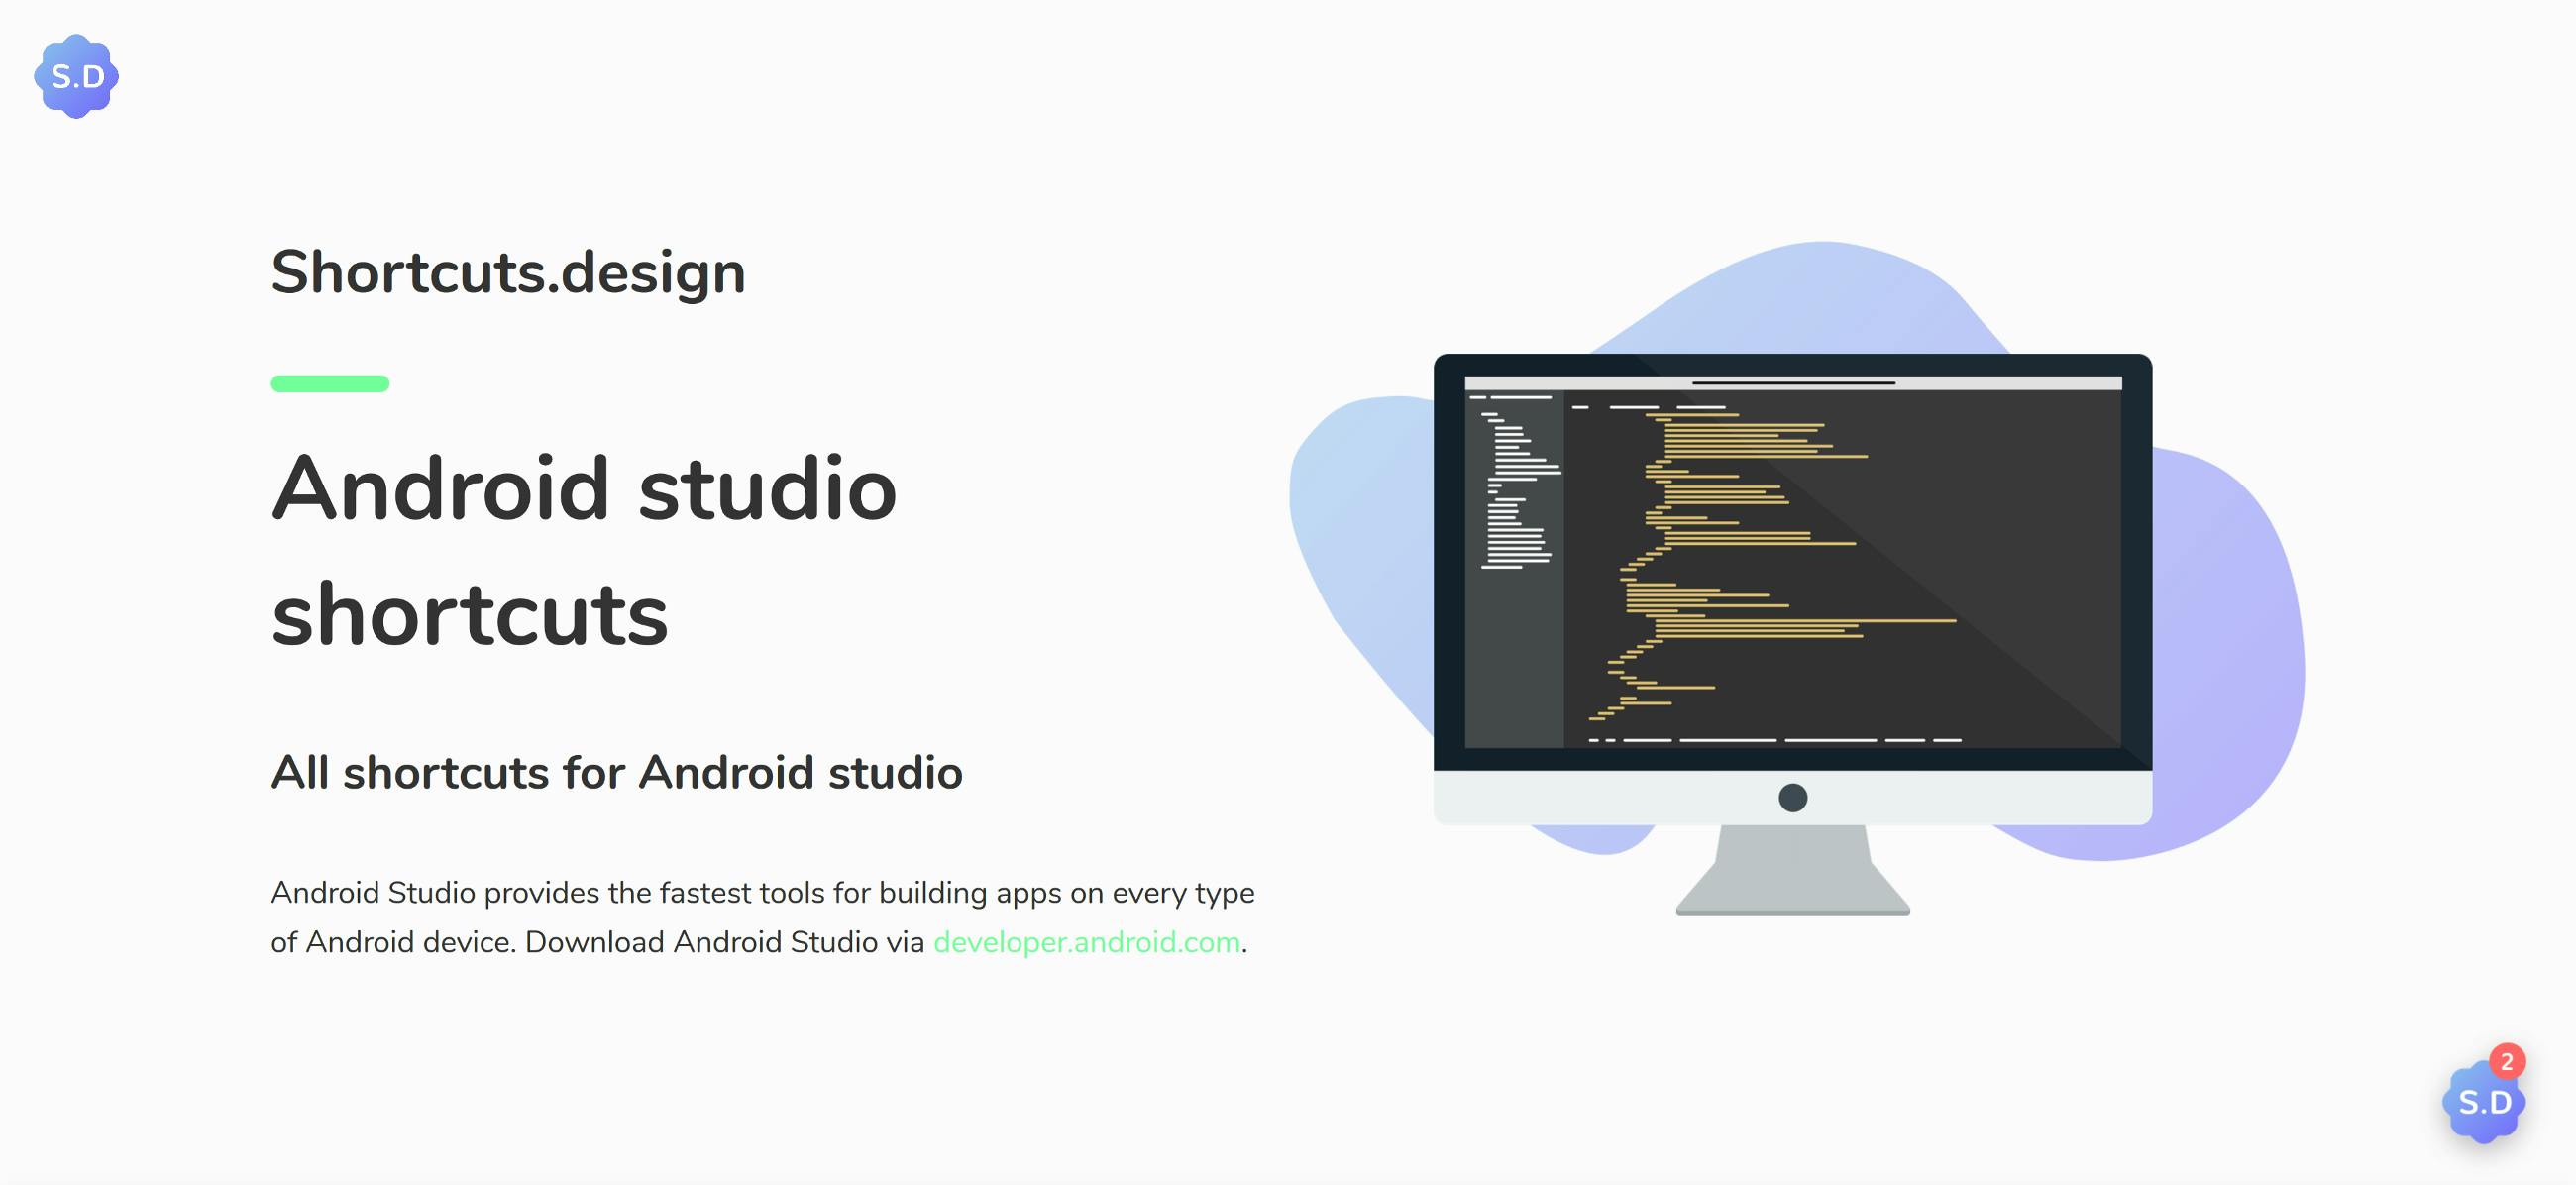 /a-tale-of-shortcuts-for-android-studio-a-quick-pull-request-6f6487d5739c feature image